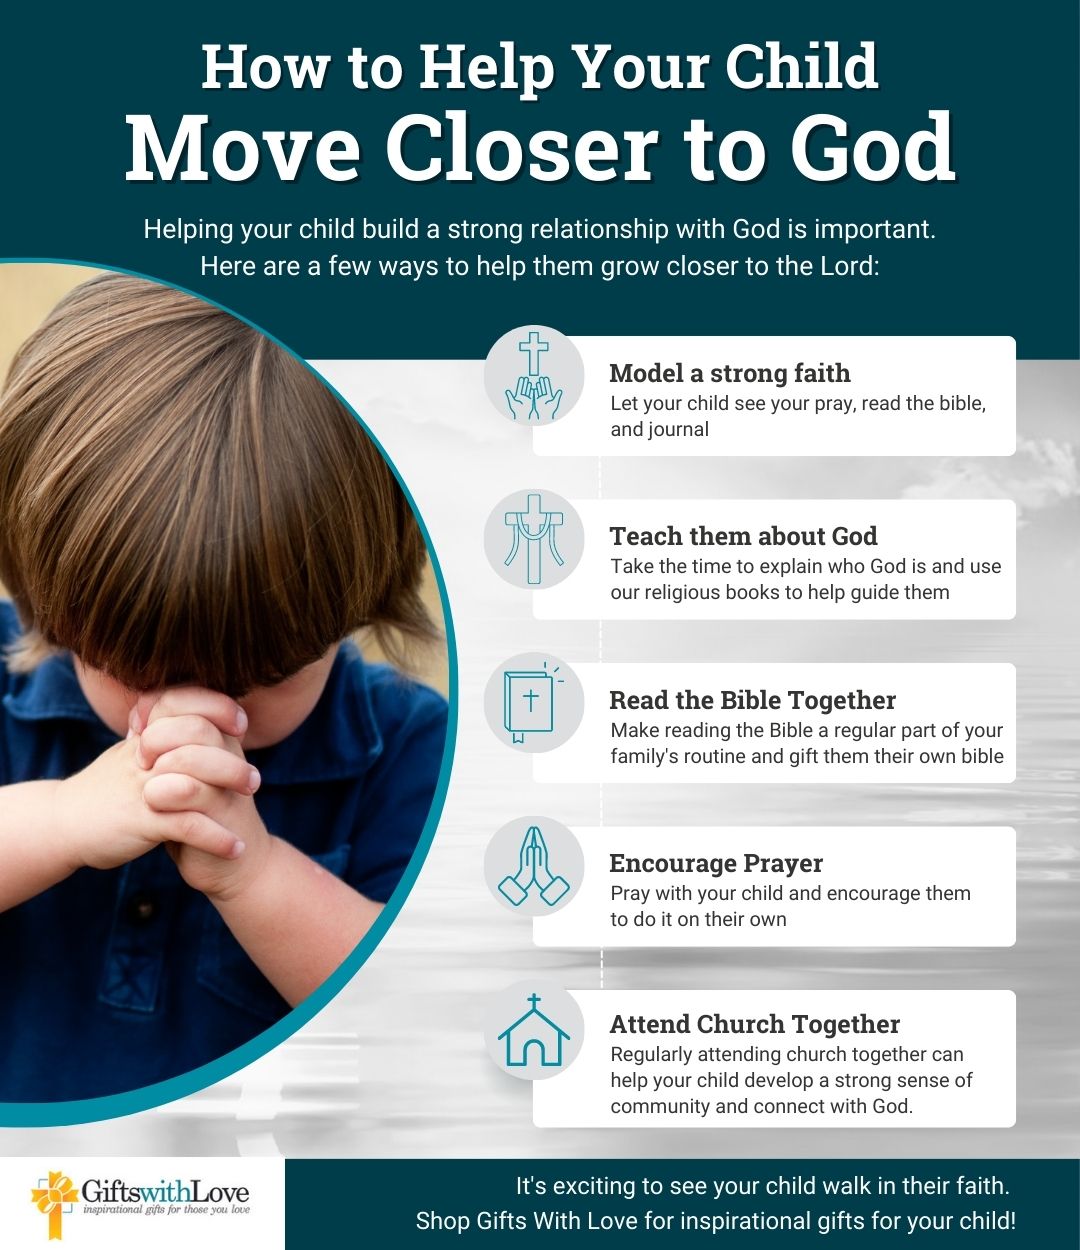 How to Help Your Child Move Closer to God